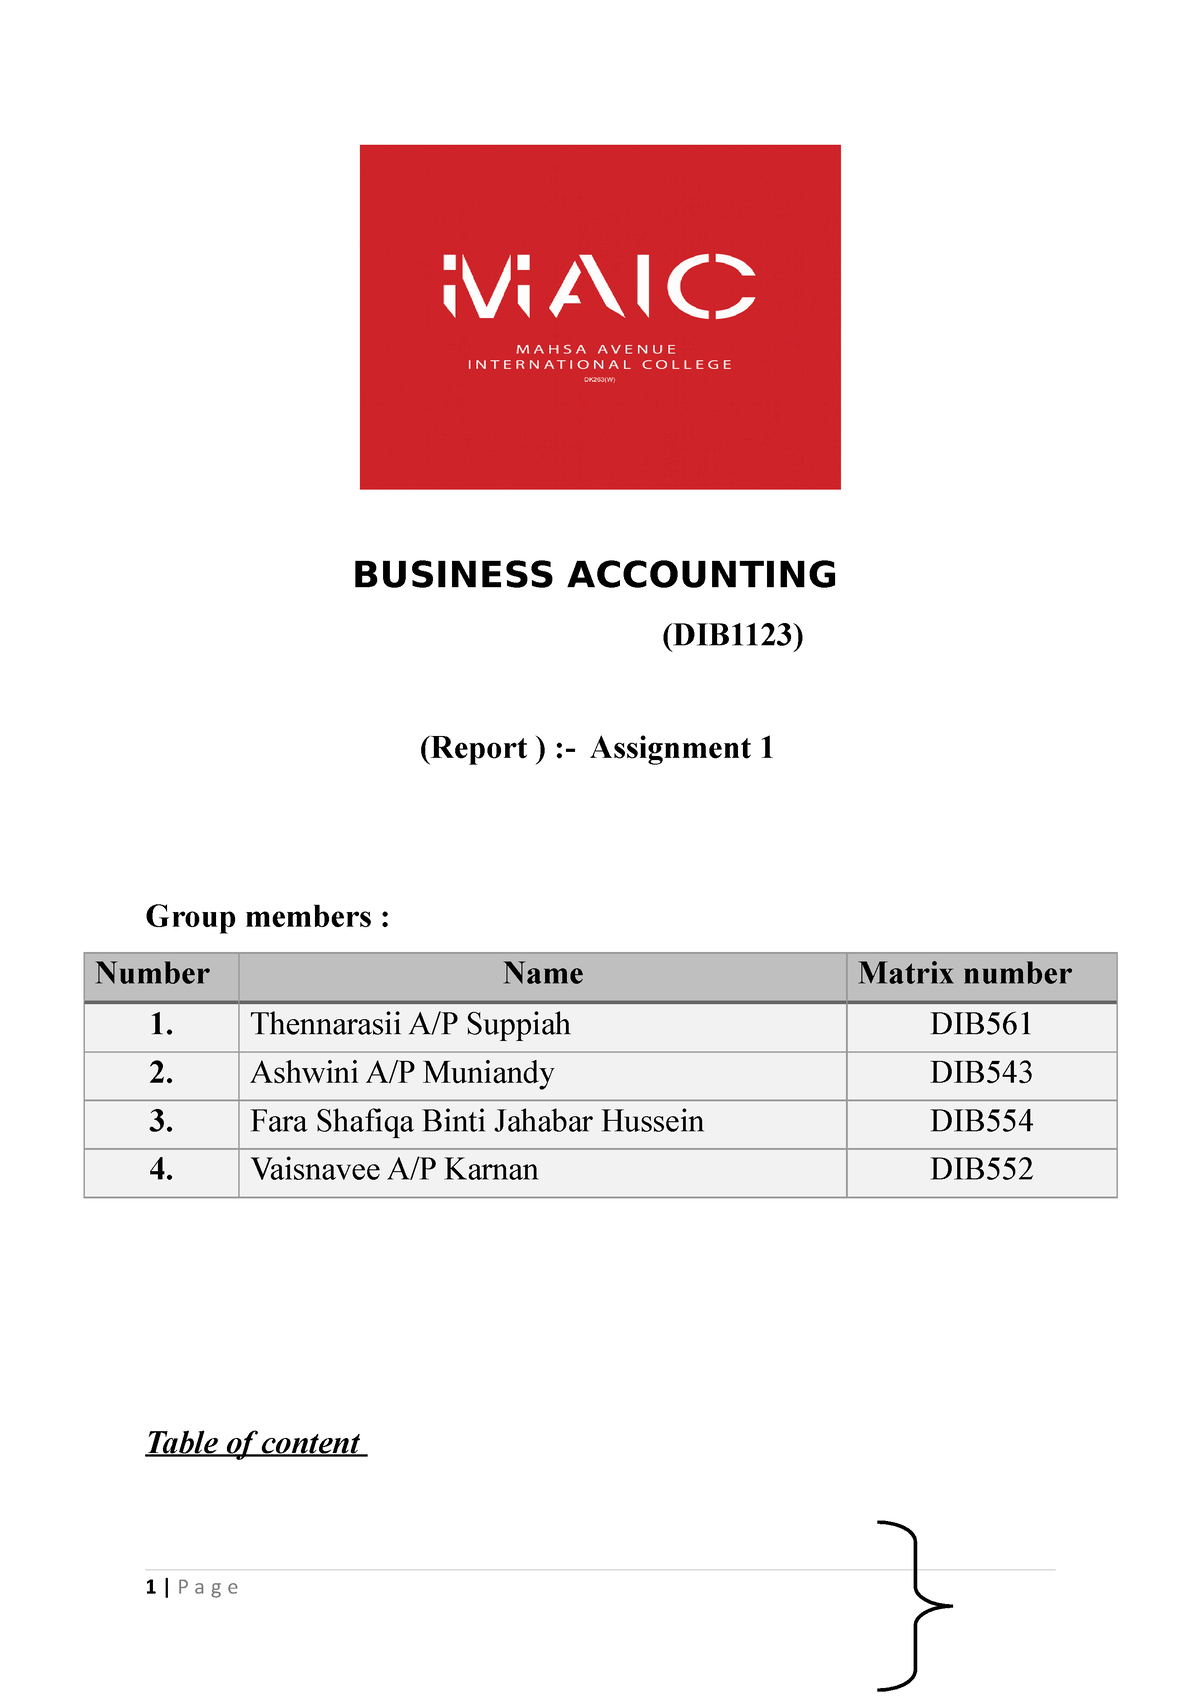 contoh assignment business accounting